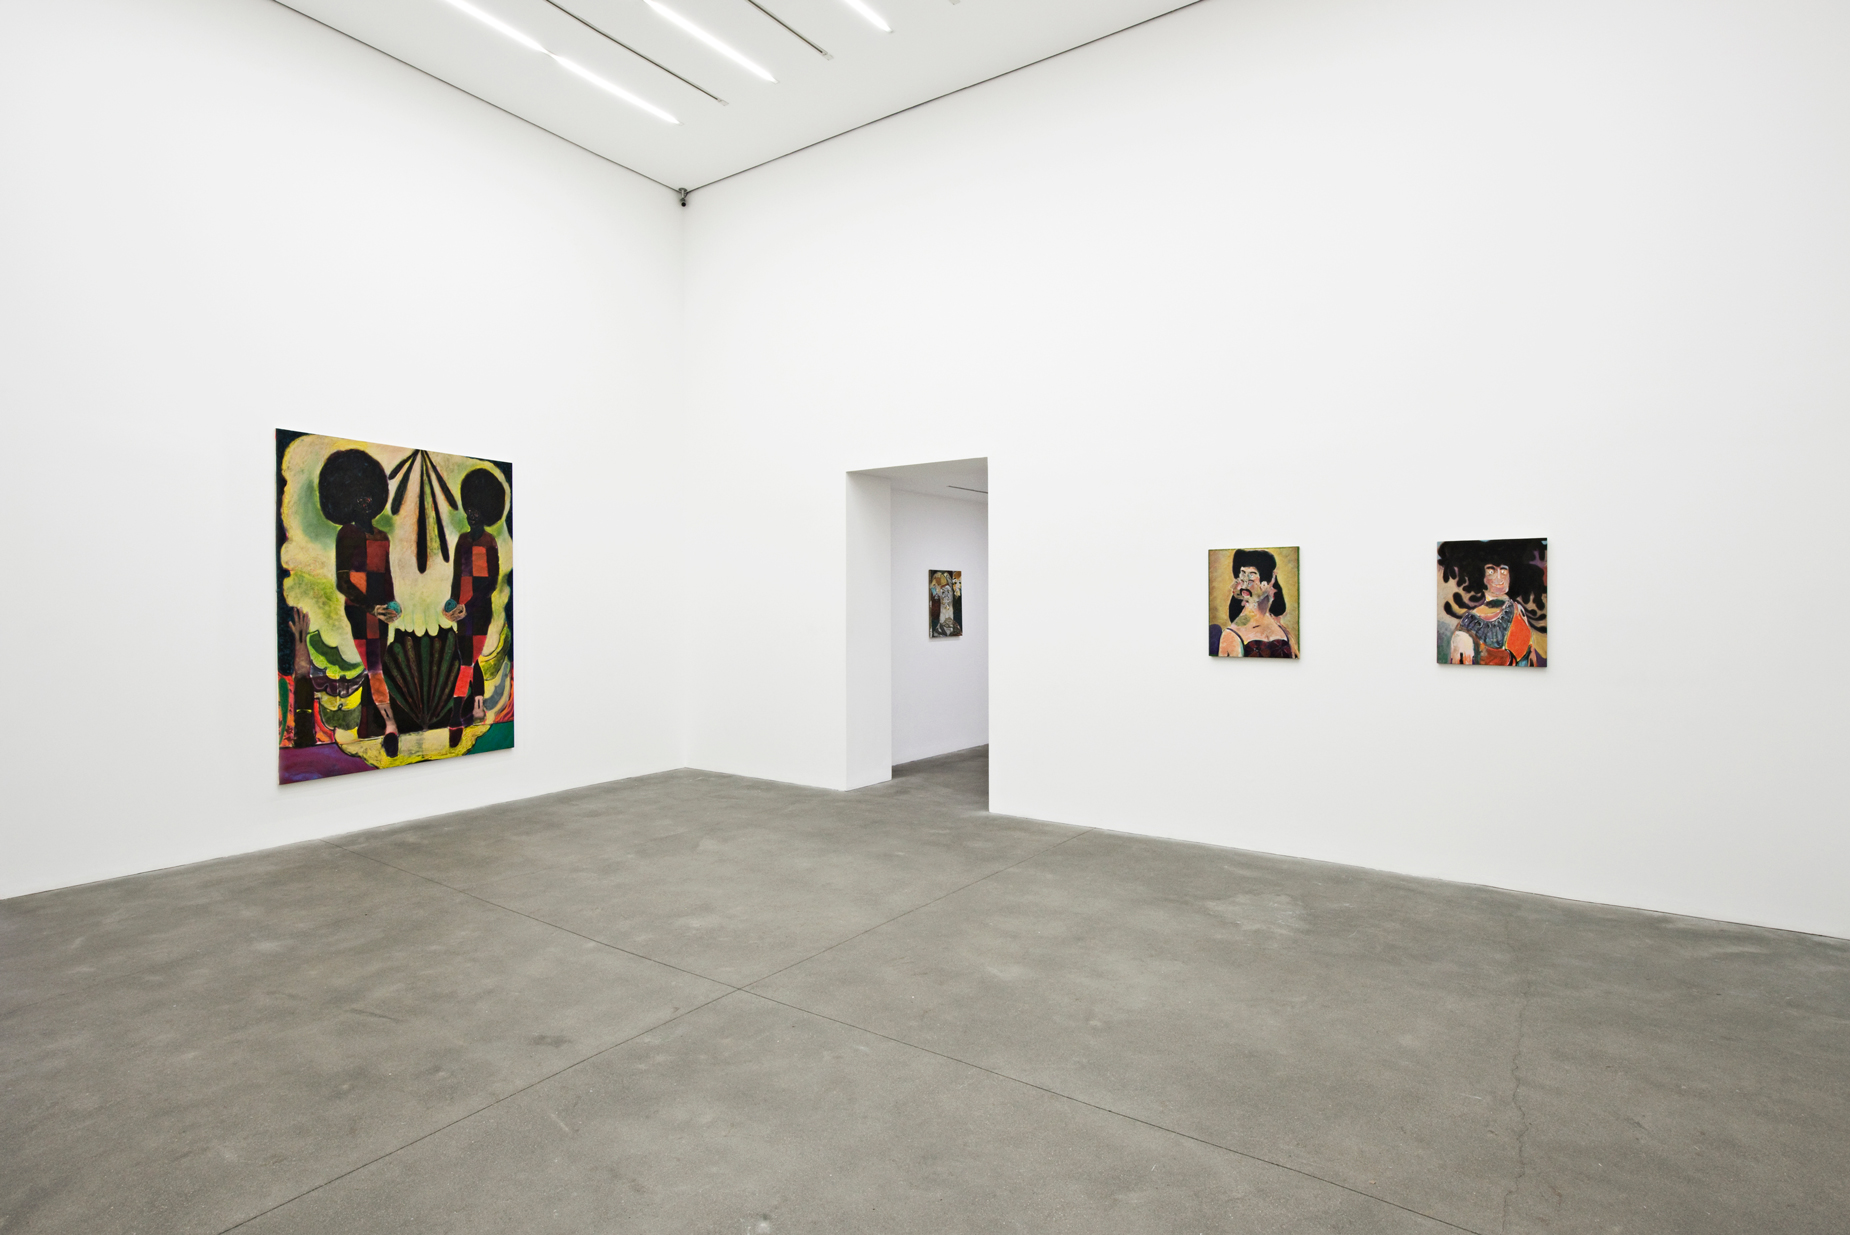 5 - Ryan Mosley at Alison Jacques 2014 London - 21.03.2014